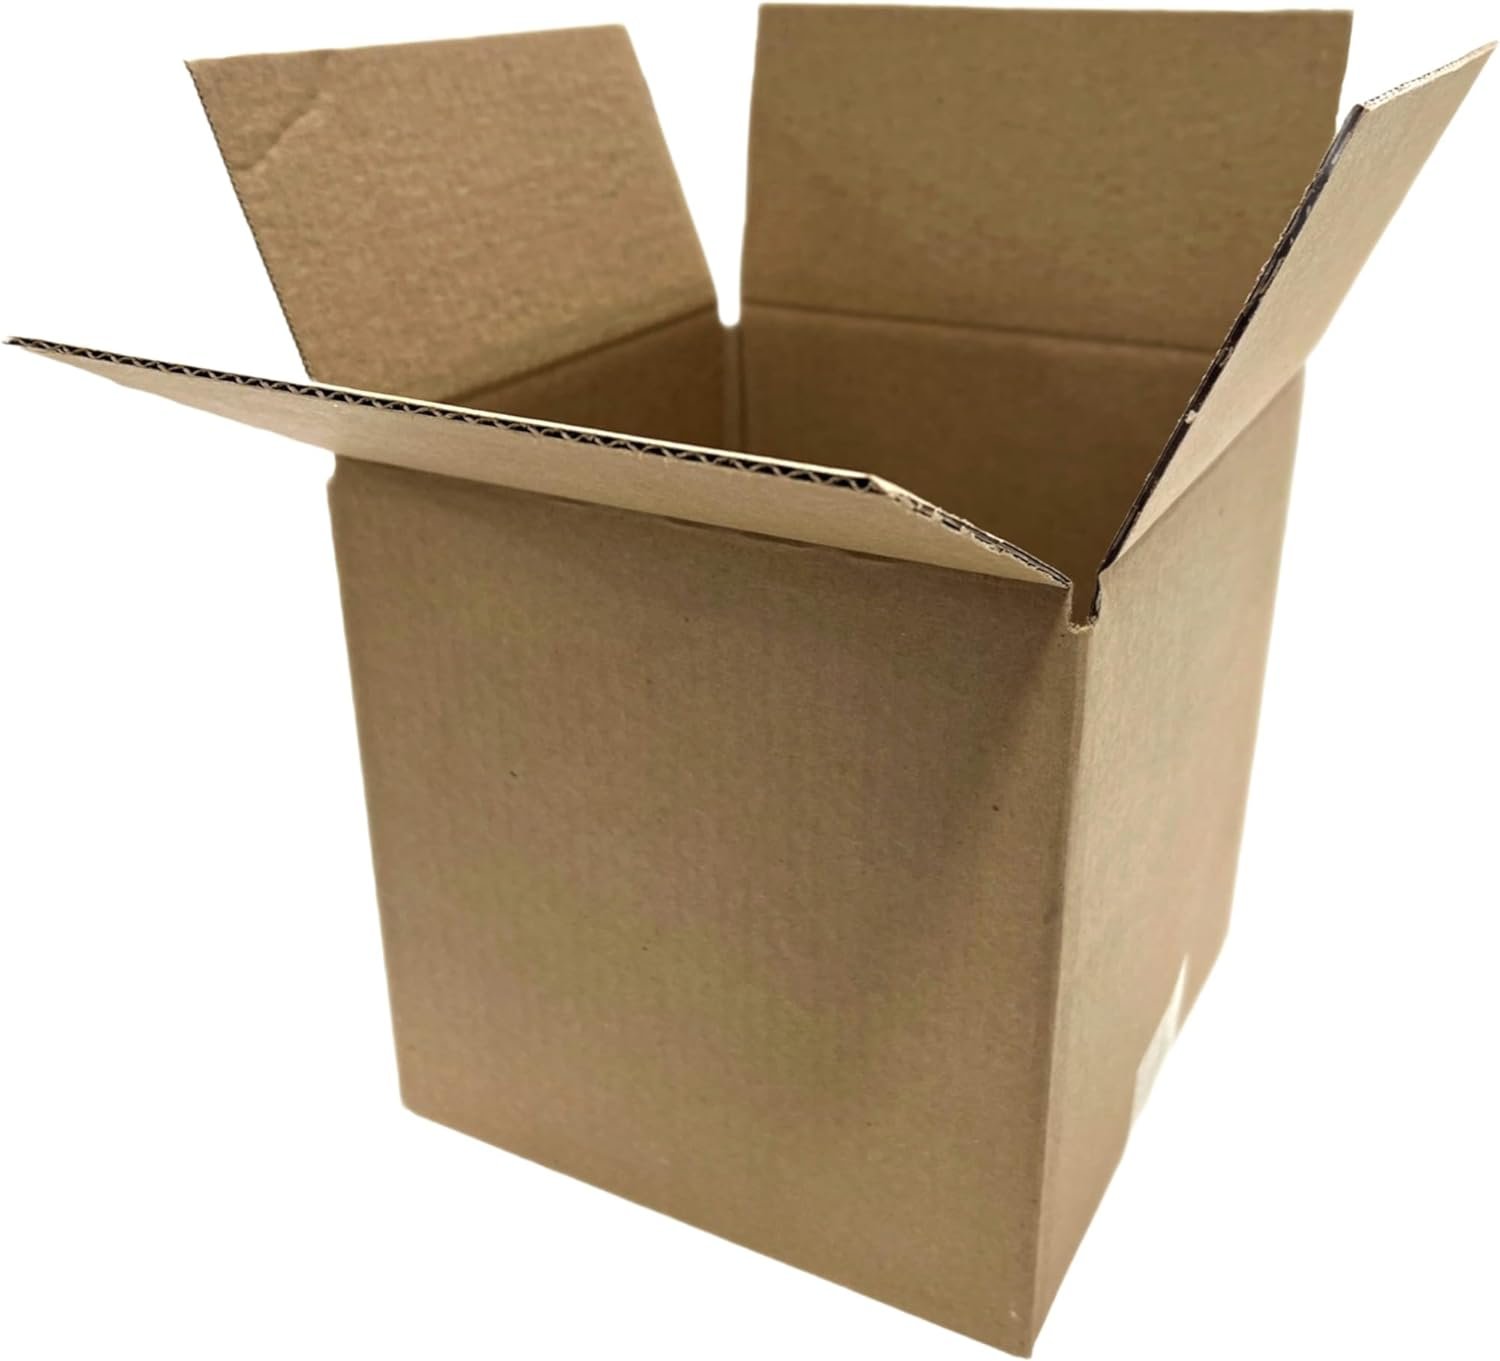 50 6x6x4 Cardboard Paper Boxes Mailing Packing Shipping Box Corrugated Carton